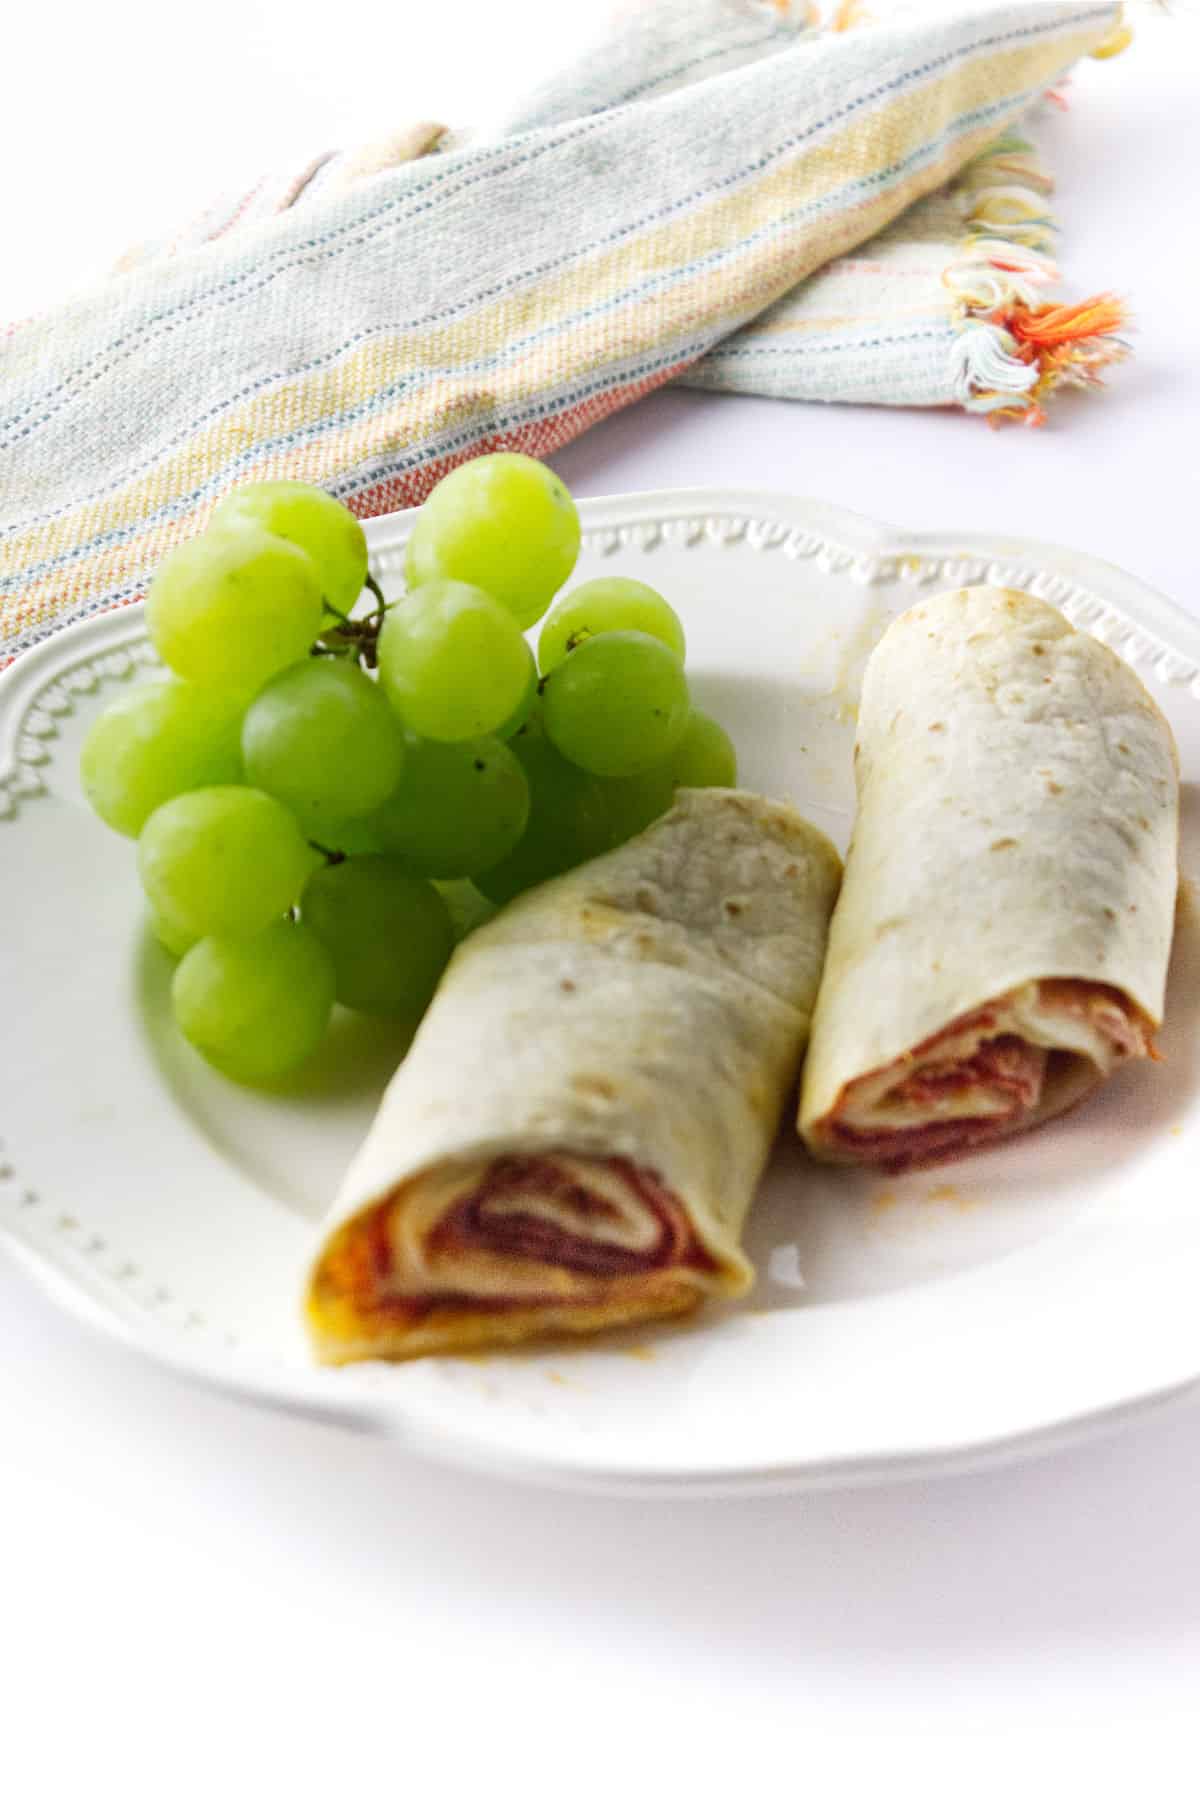 Monte Cristo Roll Ups on a plate of green grapes.